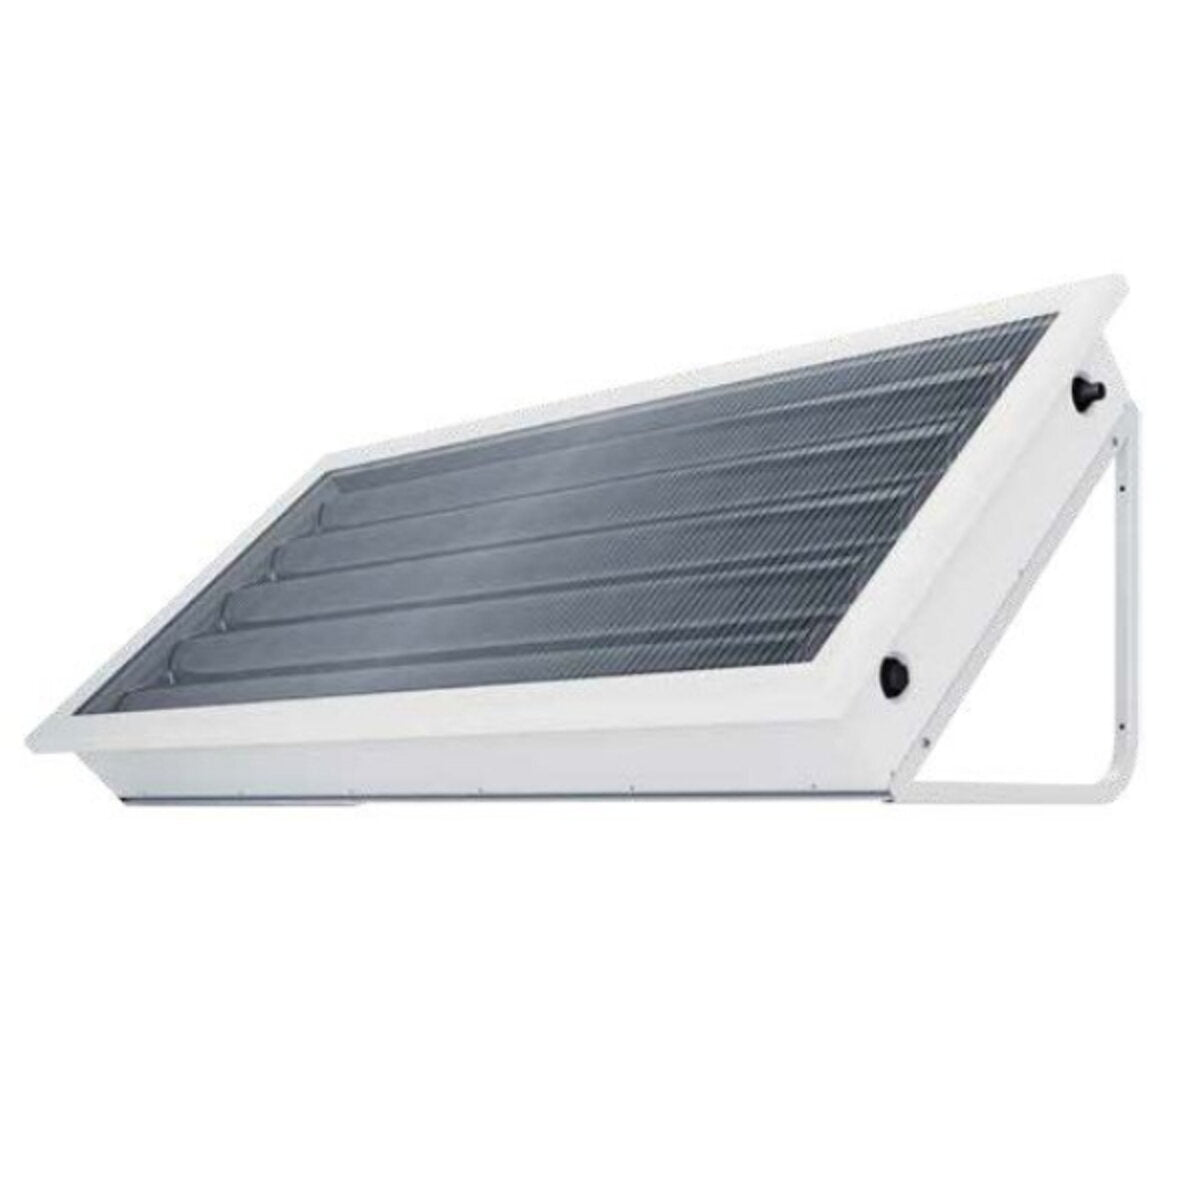 Natural circulation solar panel Pleion Ego 220 white 210 liters with installation accessories